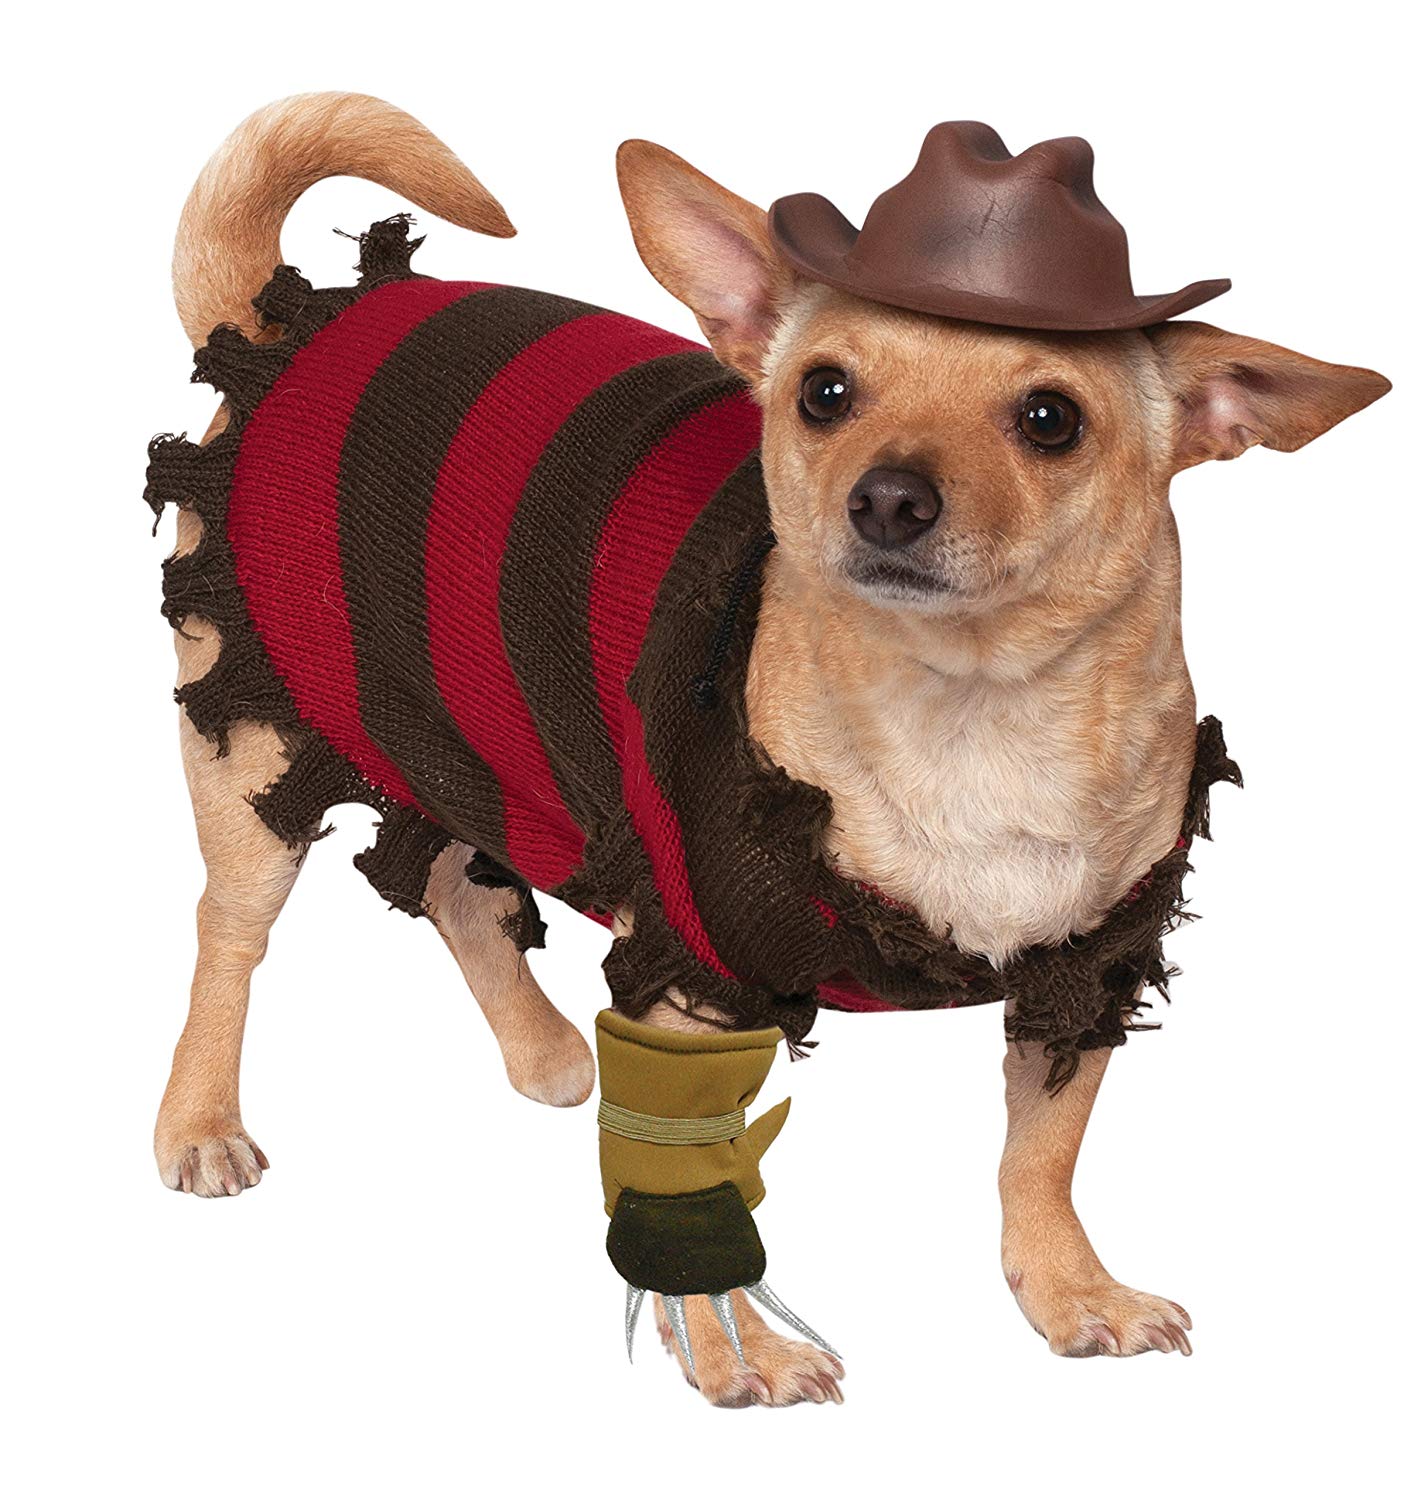 Dog Costumes By Breed Chihuahua Pug Pitbull Dog Costumes More